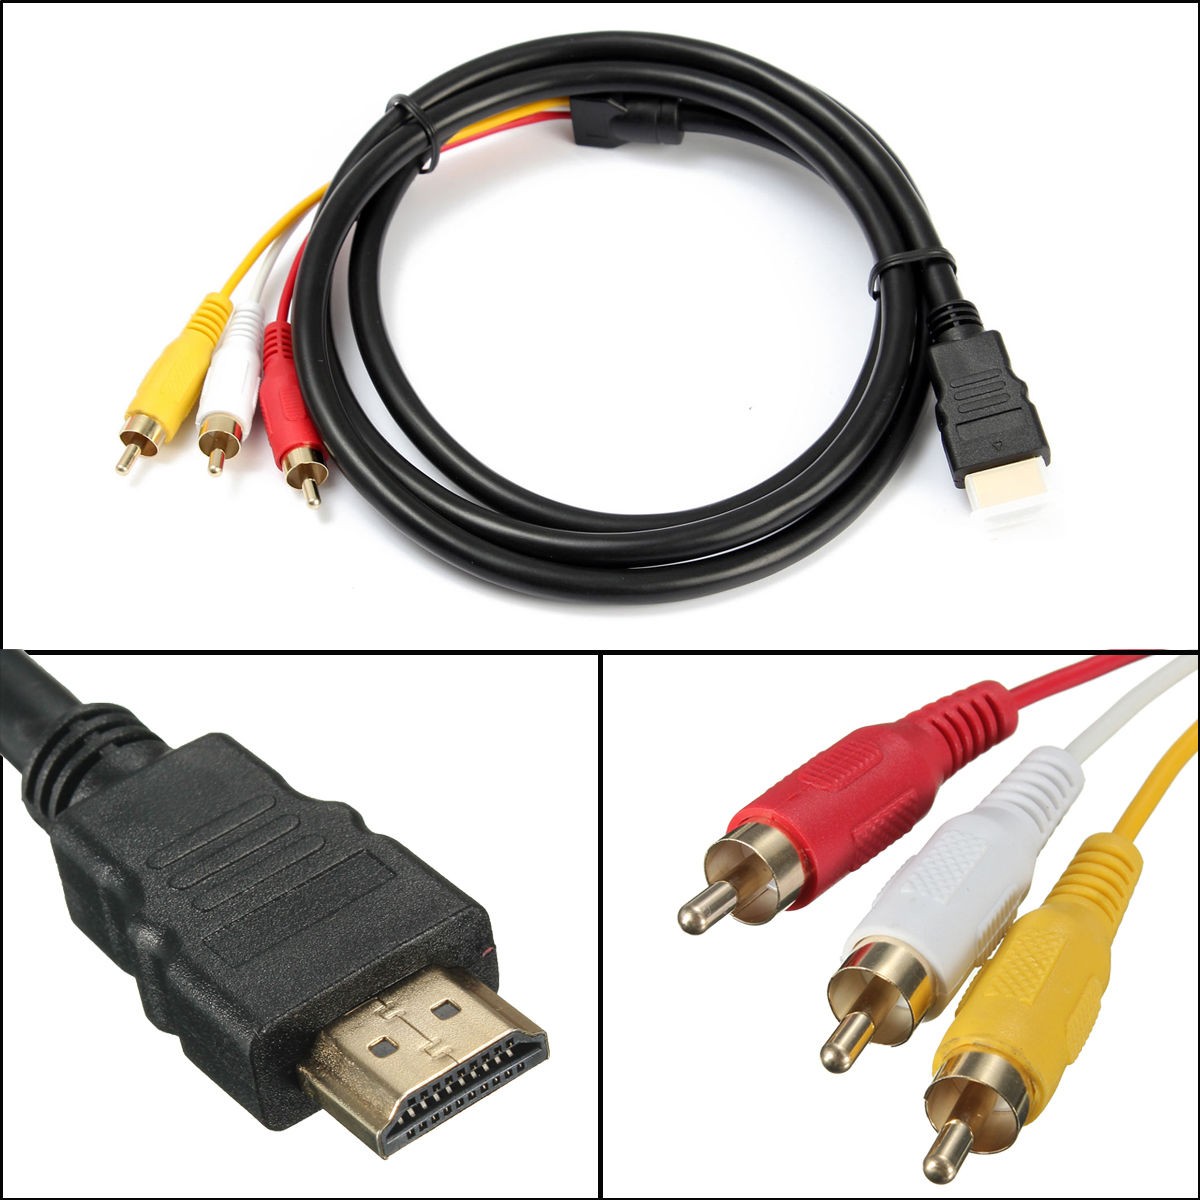 5ft 1 5m 1080p hdmi male to 3 rca audio video av transmit cable cord5ft 1